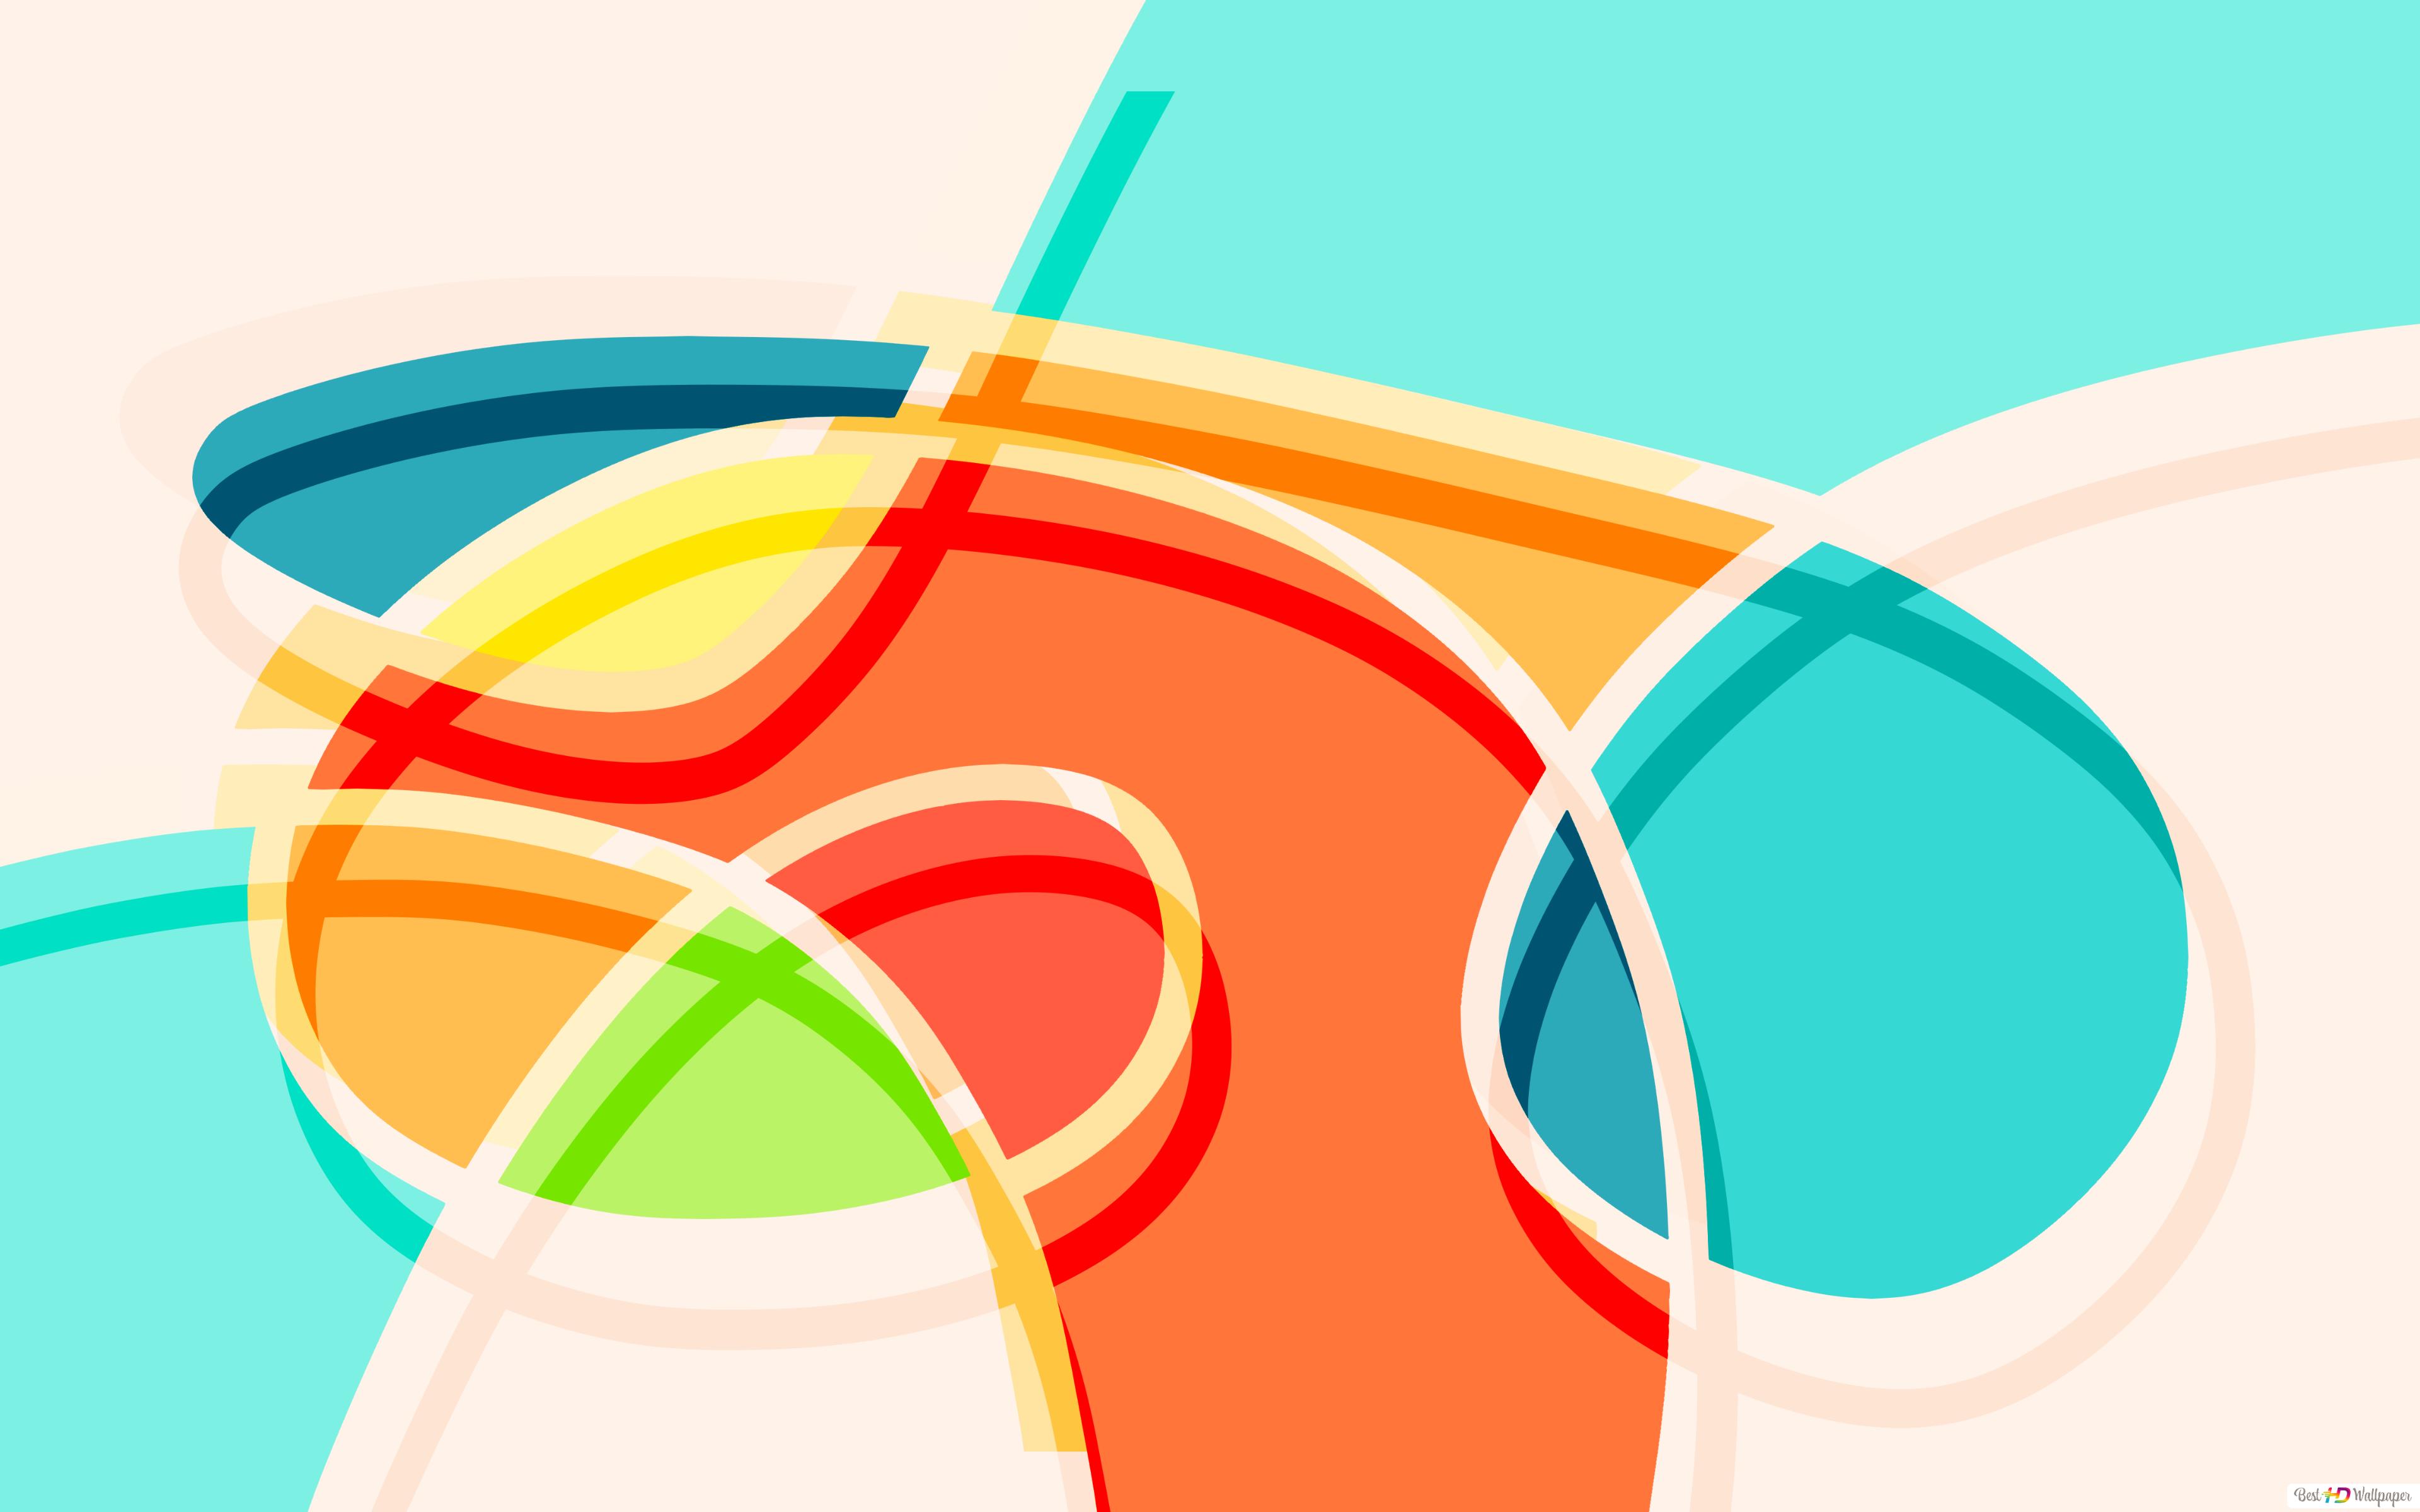 Curvy Colorful Lines Wallpapers